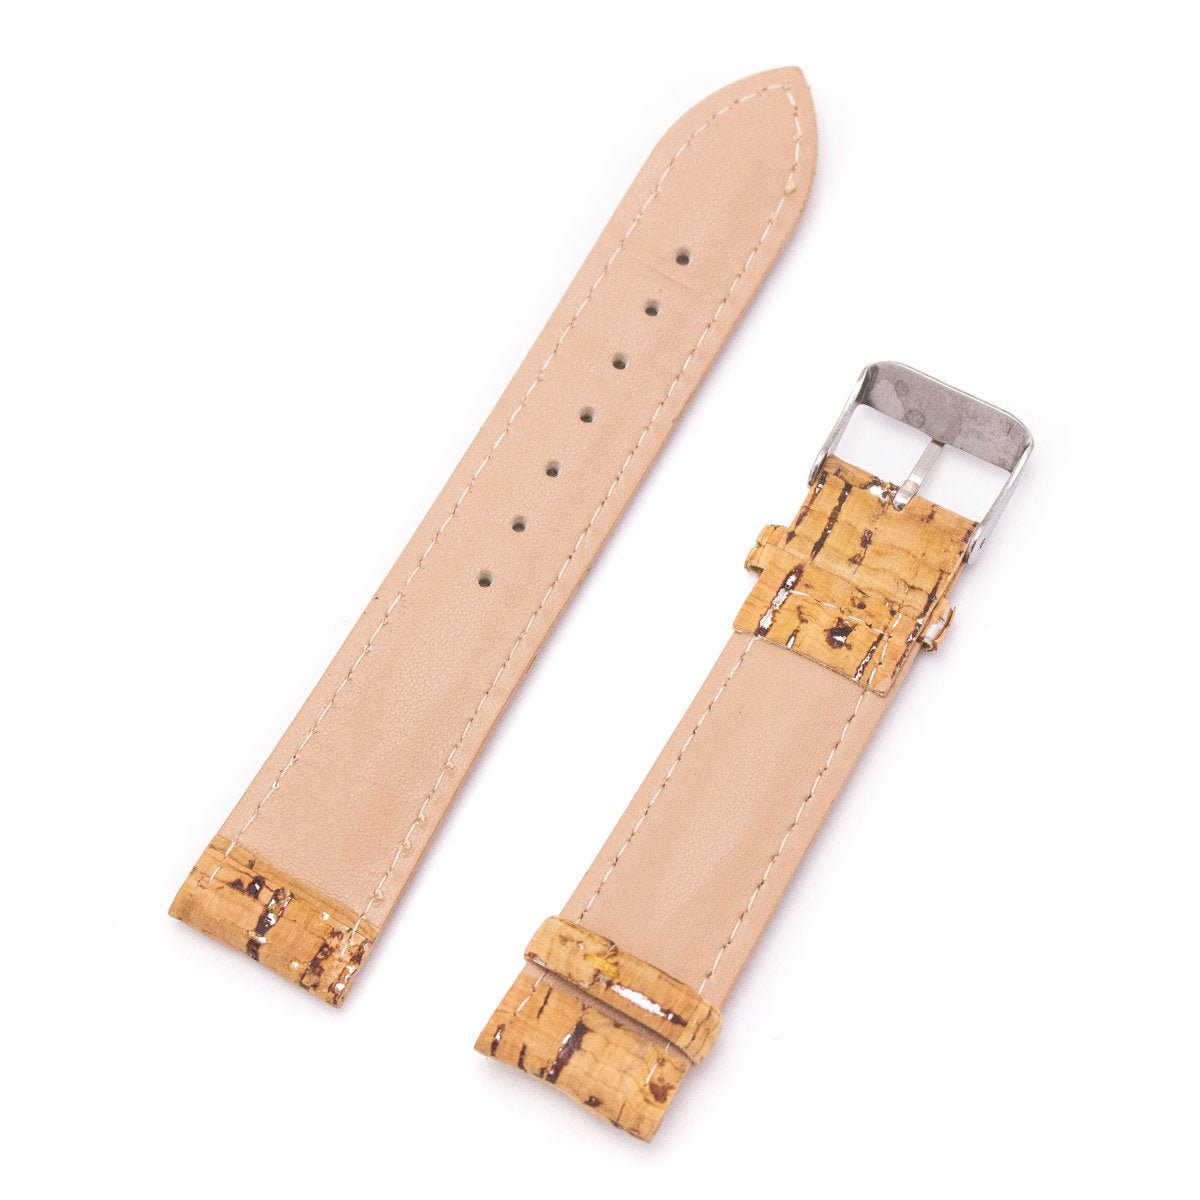 Rustic Natural Cork w/ Silver Watch Strap | THE CORK COLLECTION 